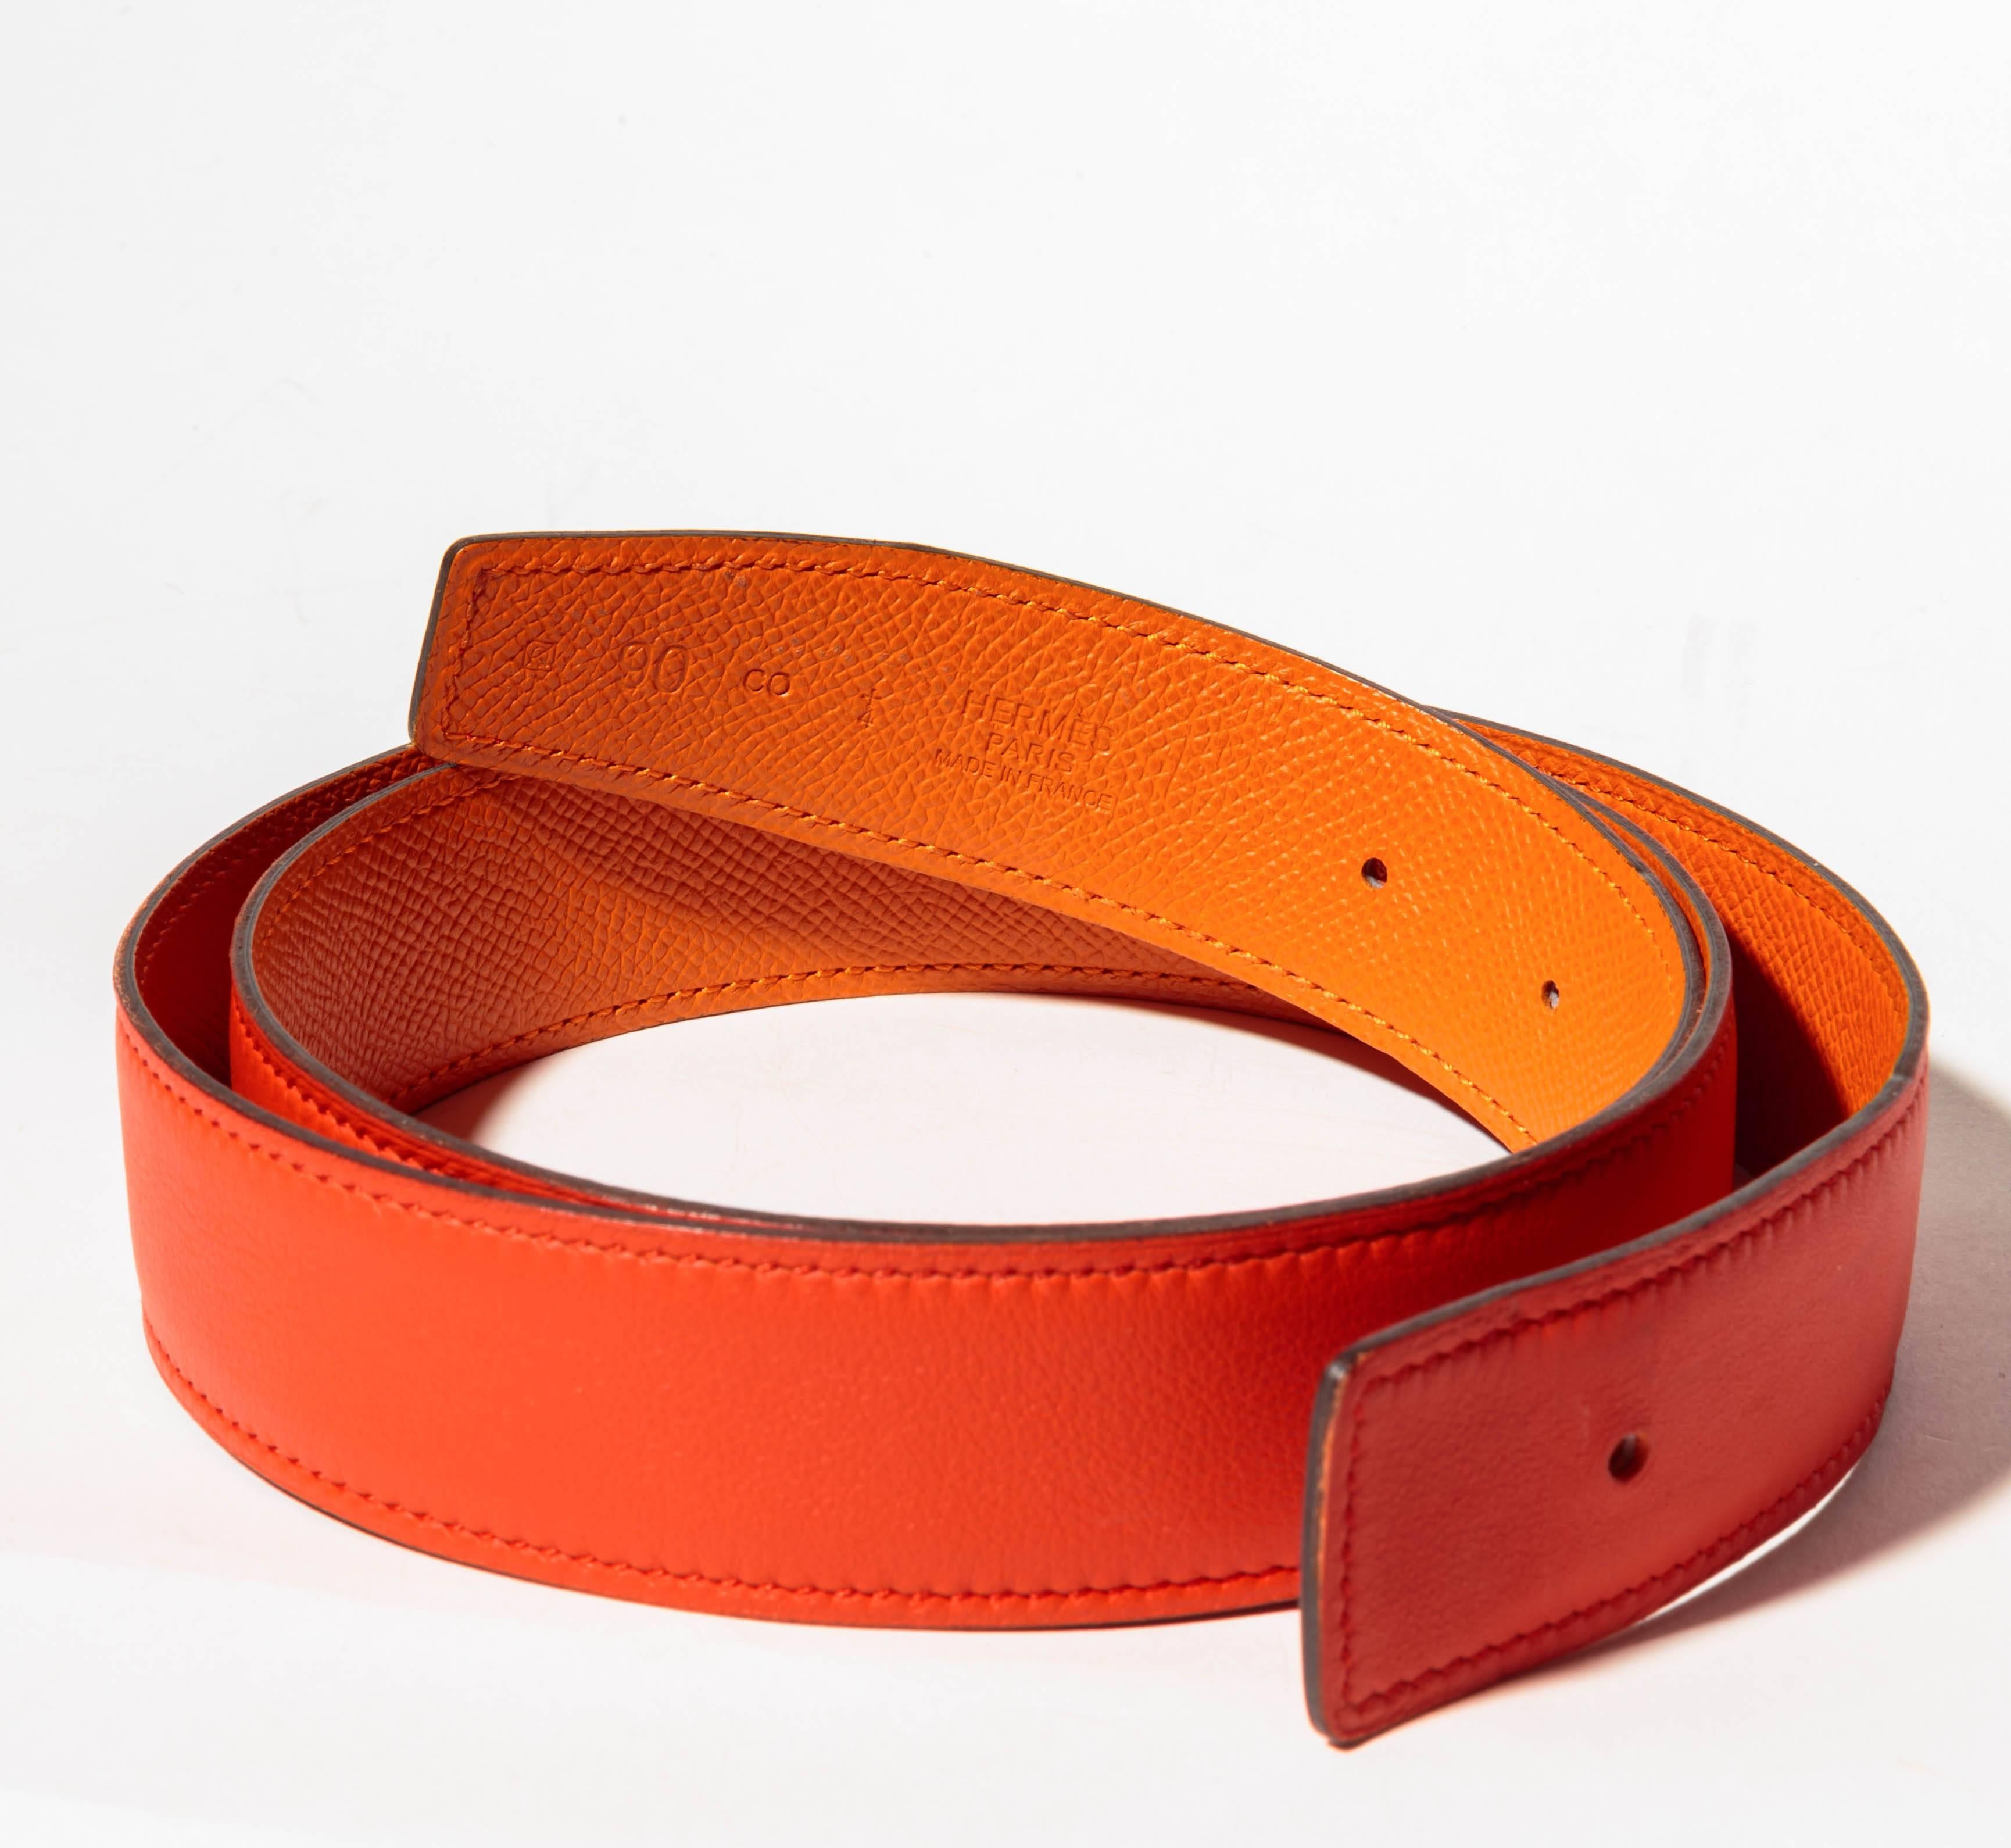 Hermes Replacement Belt in Orange Leather - 90 Cm 1